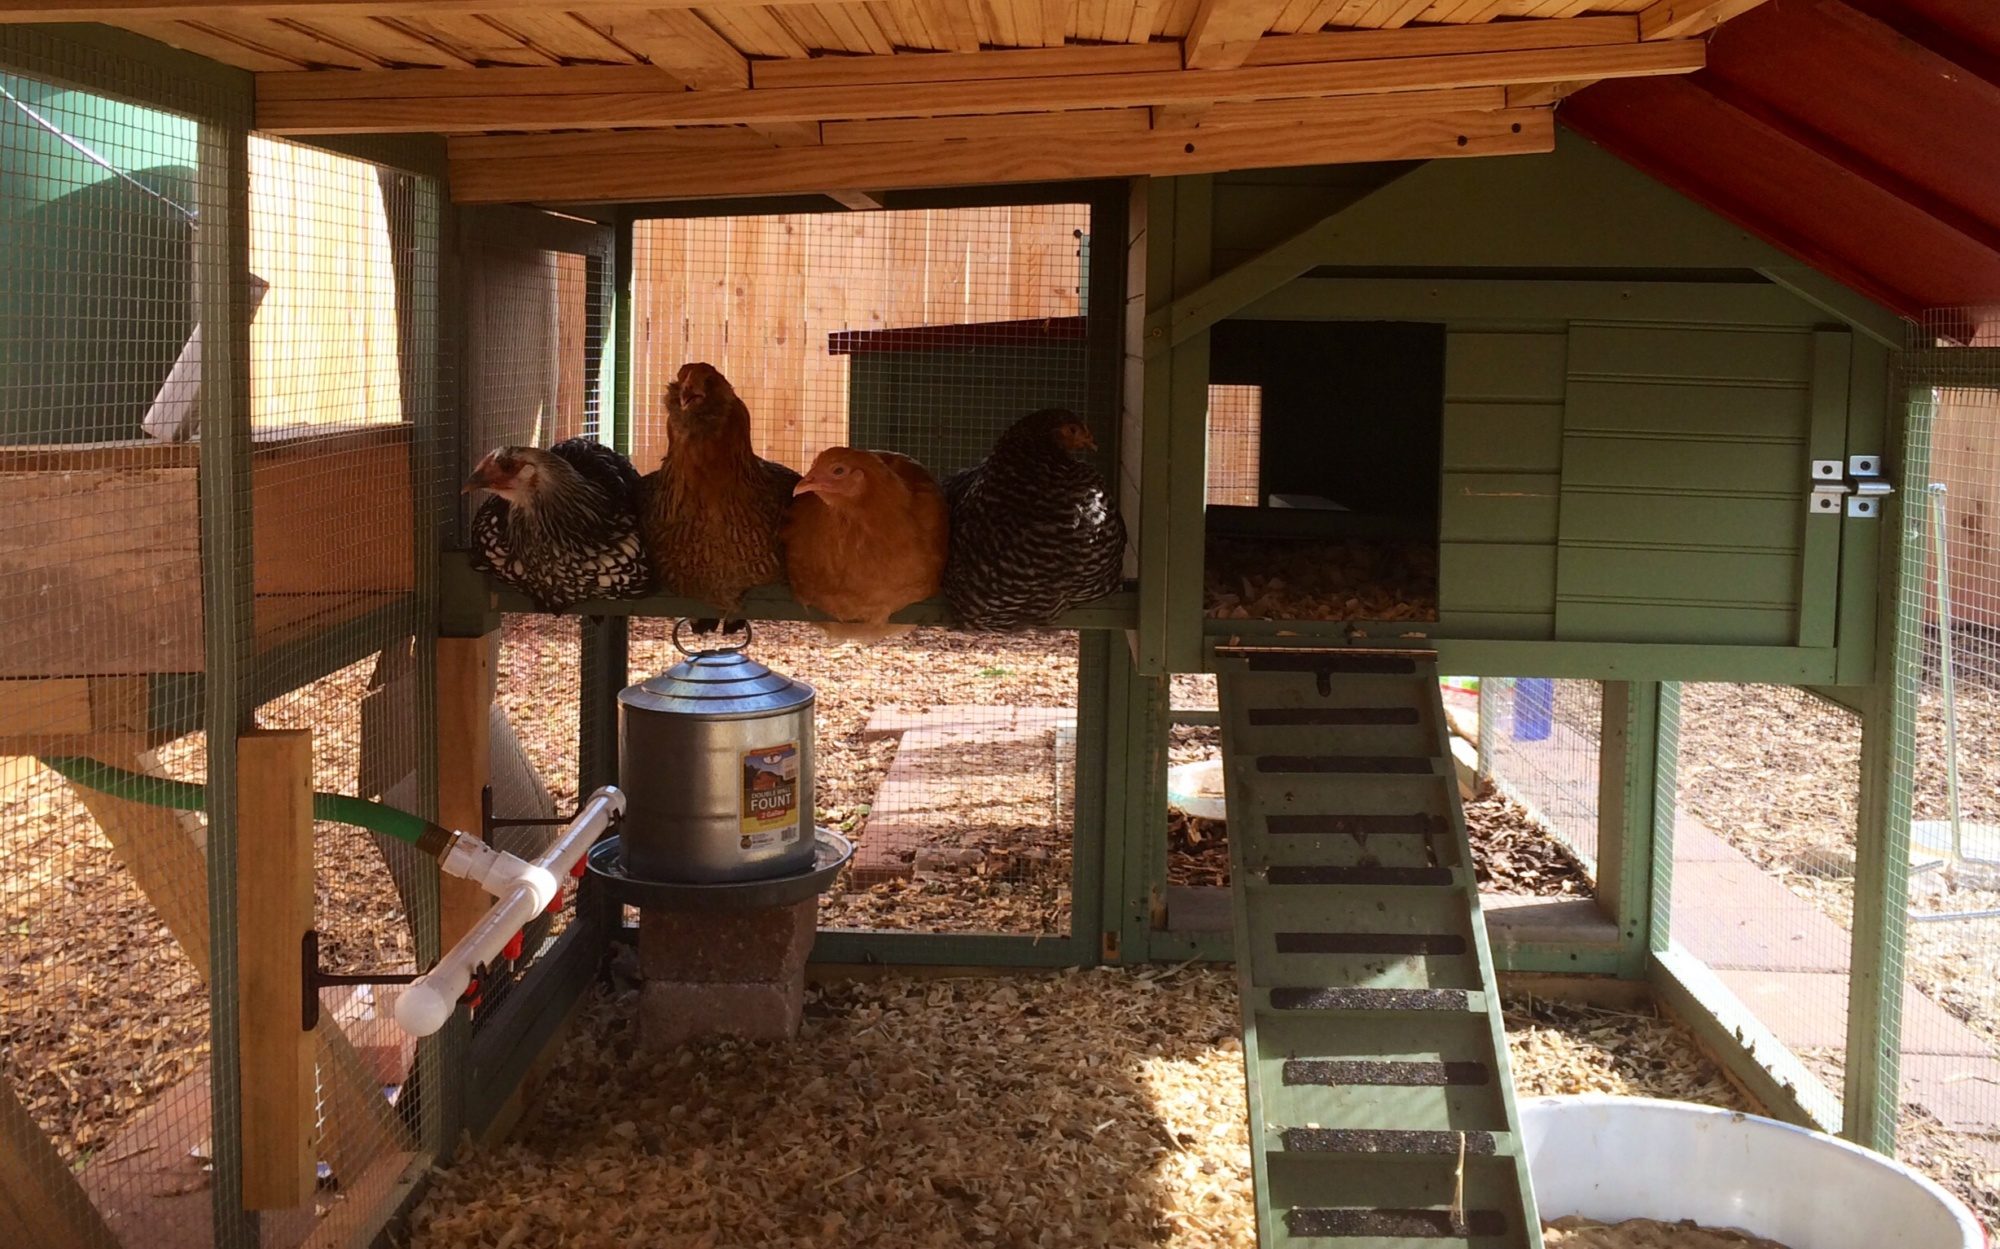 Deluxe West Texas Coop! | BackYard Chickens - Learn How to Raise Chickens